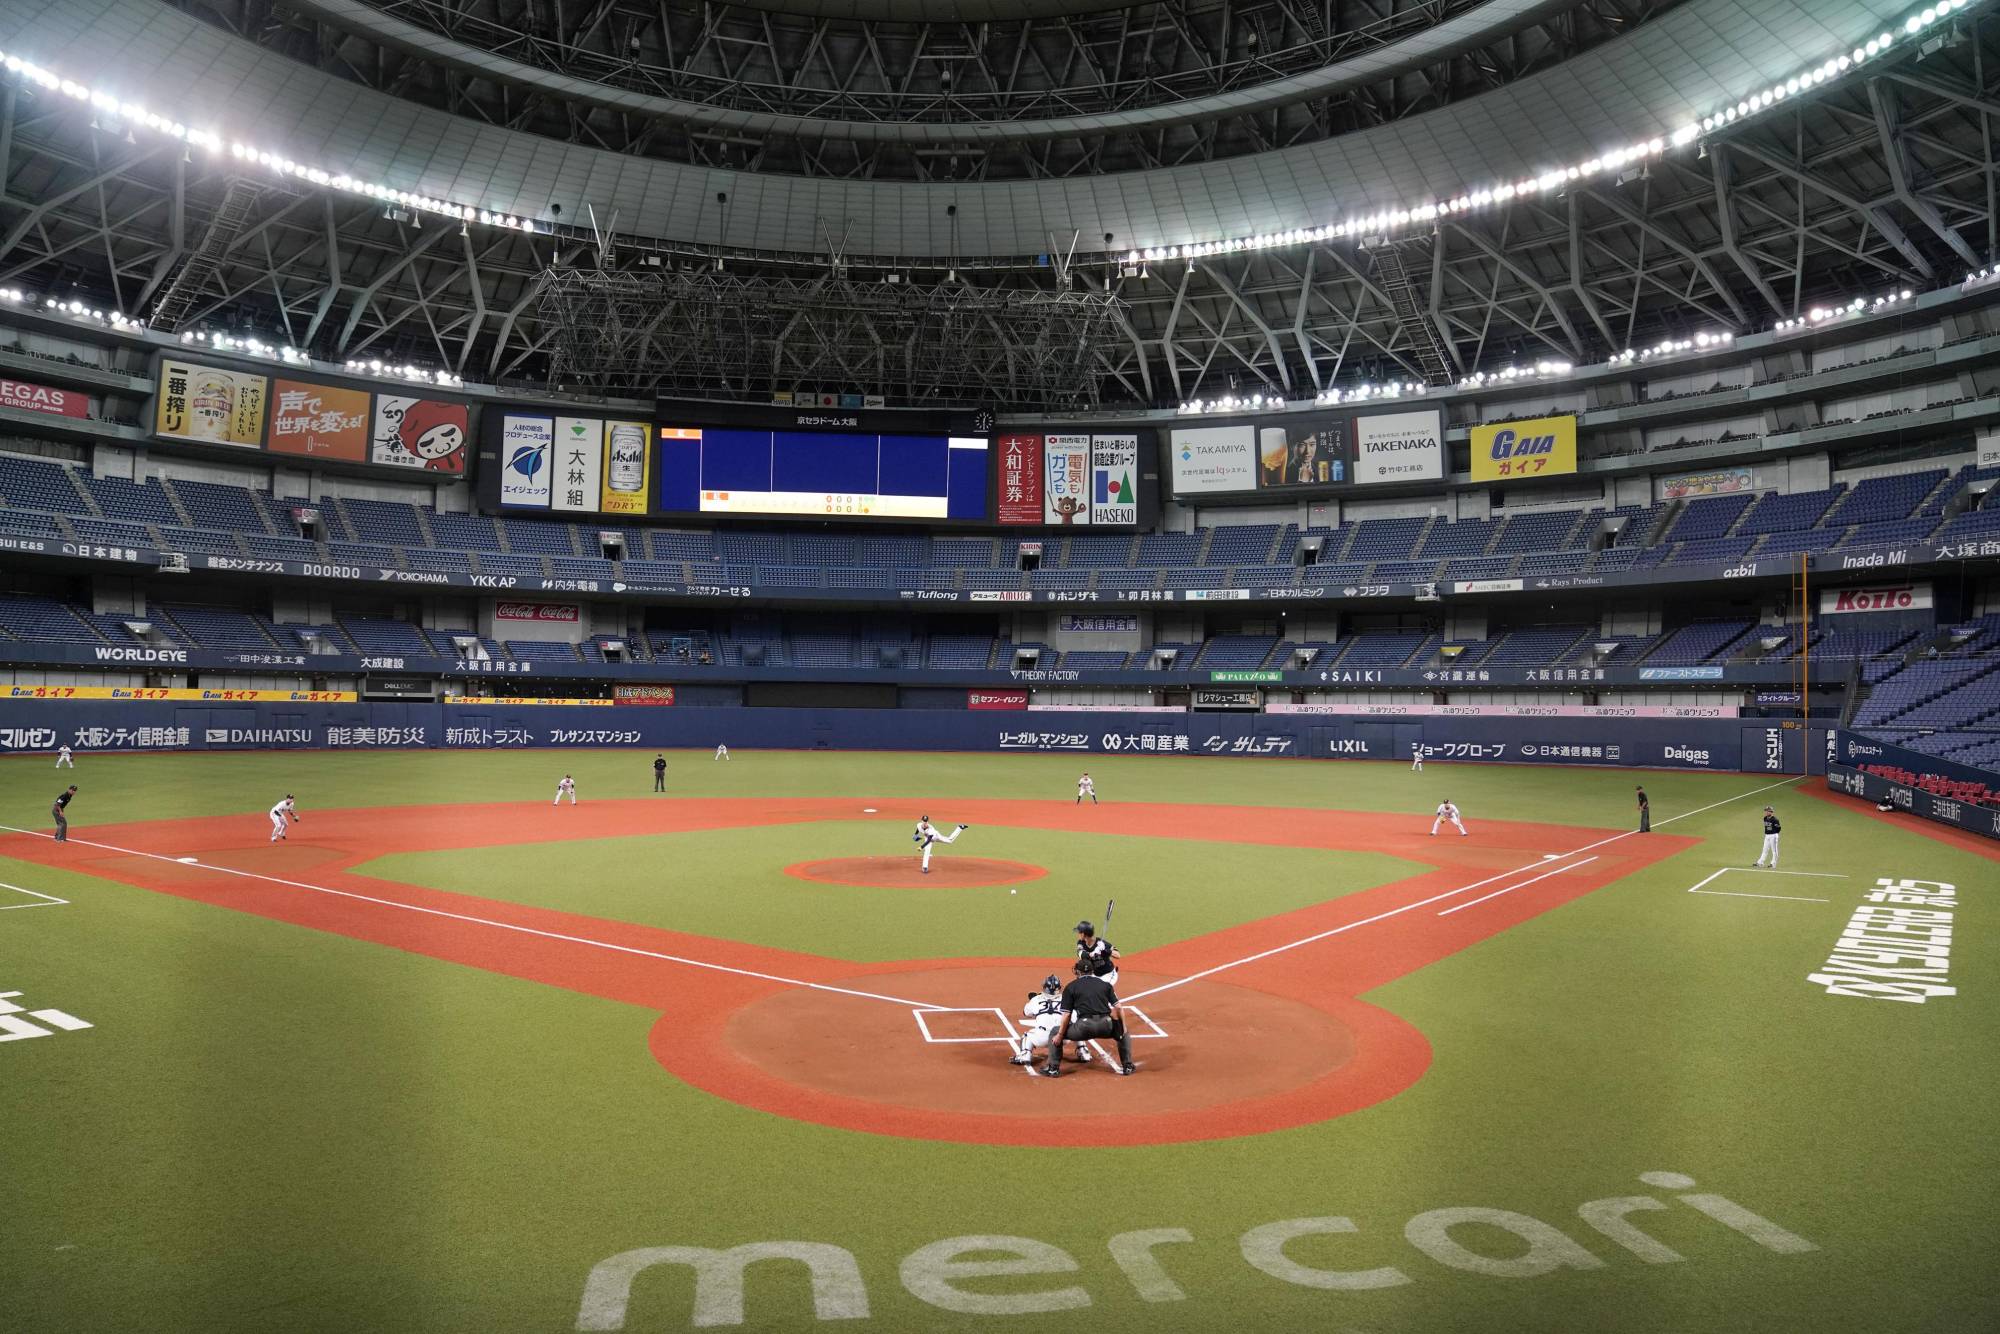 Orix plays intrasquad game as NPB inches toward opening day